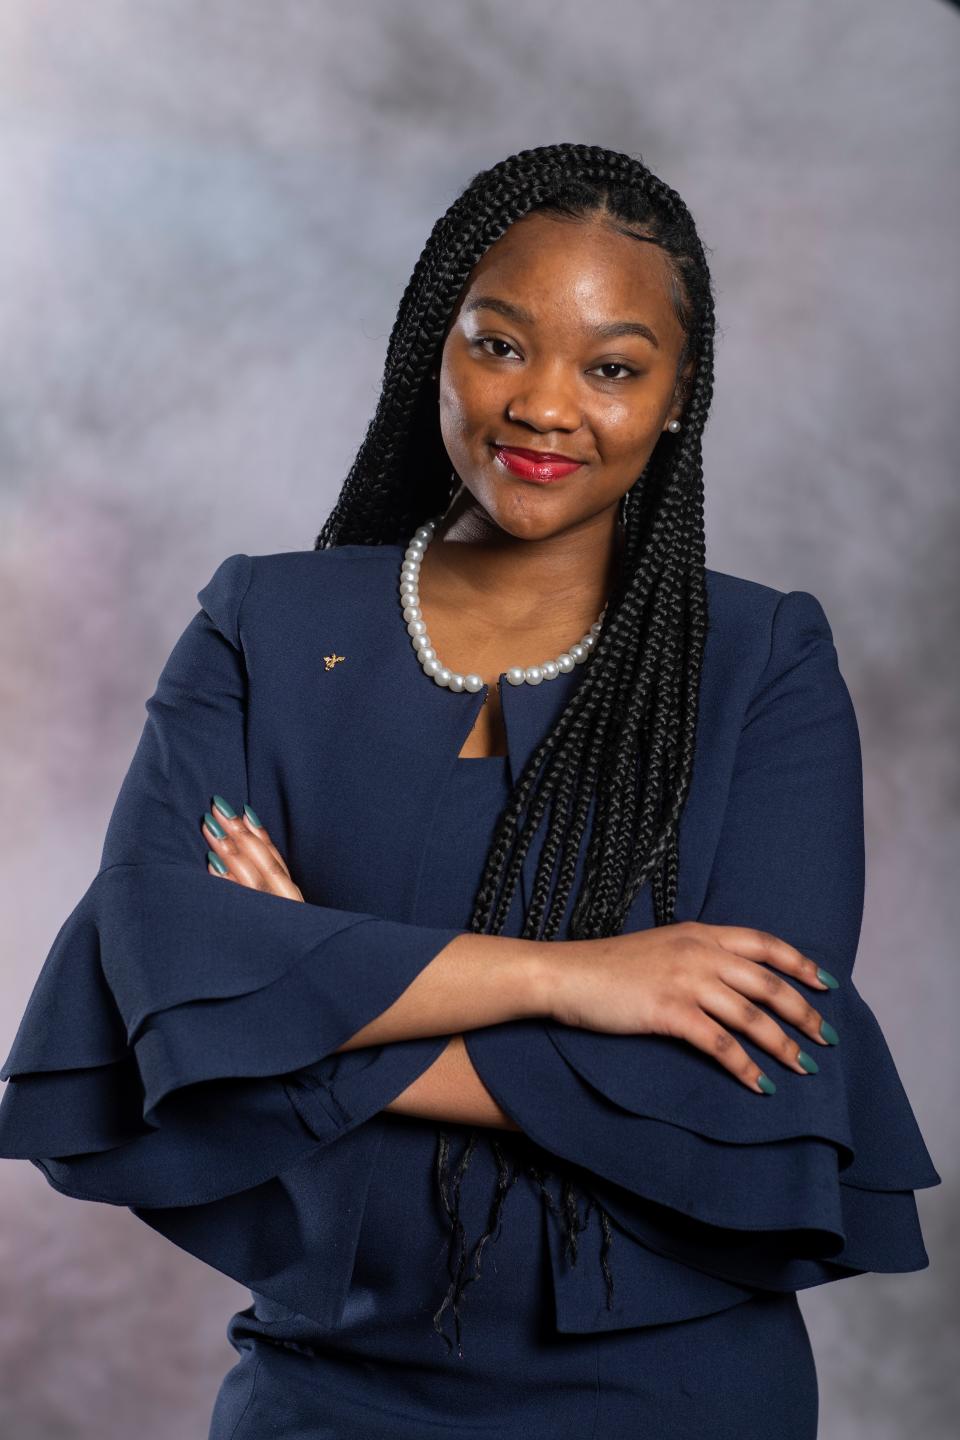 Taylor Vickers of McKinley High School will compete in the National Speech and Debate Association Tournament in the Dramatic Interpretation category.